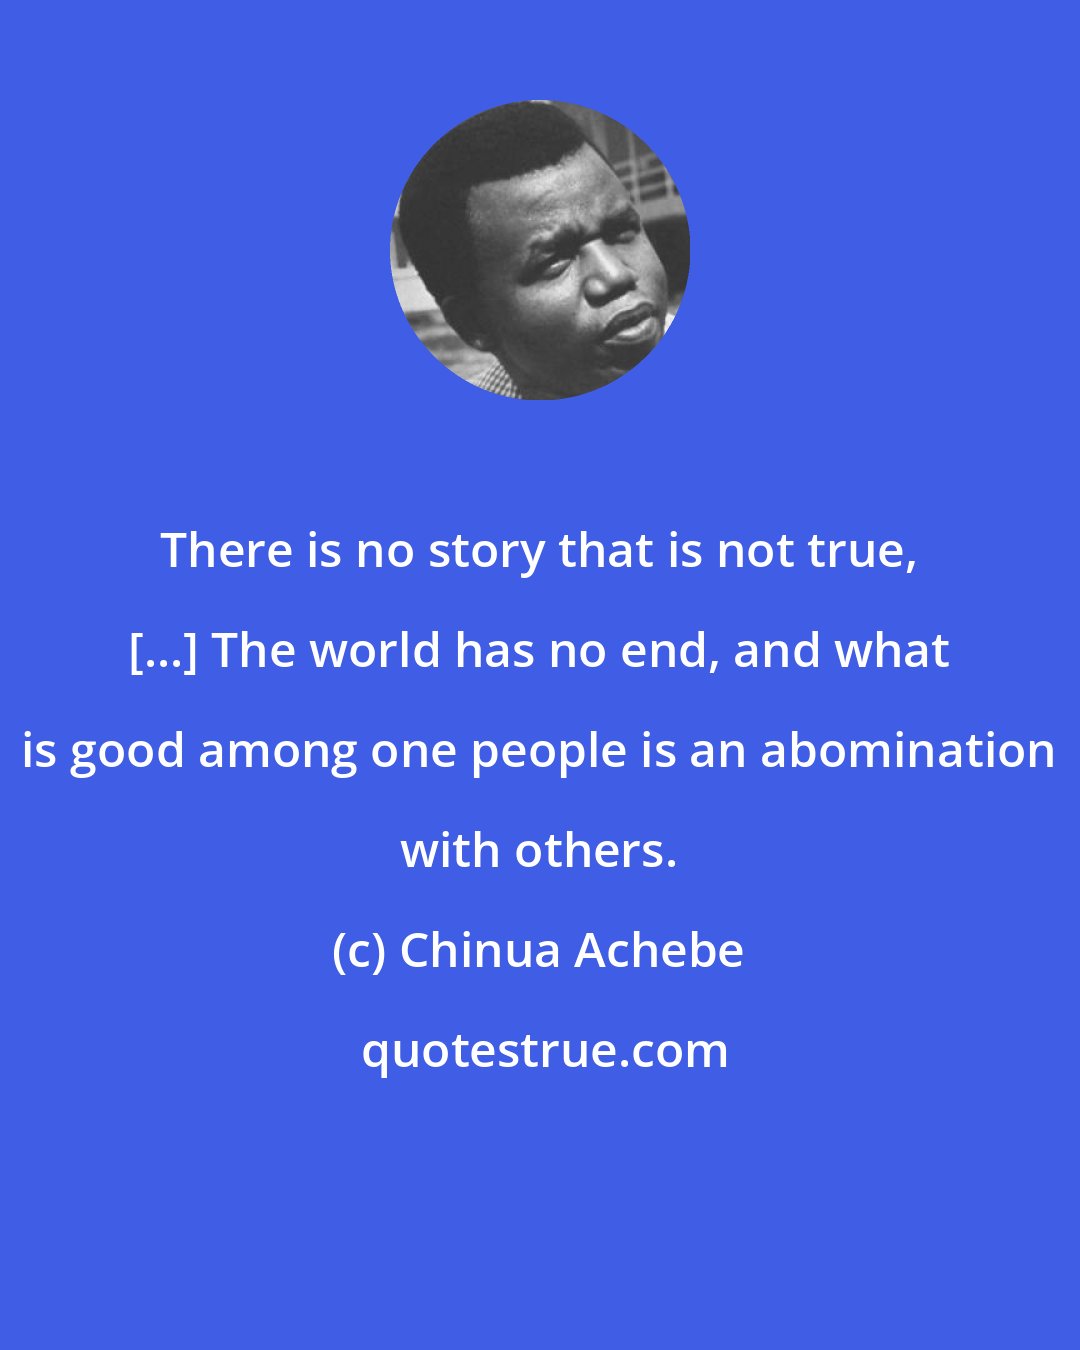 Chinua Achebe: There is no story that is not true, [...] The world has no end, and what is good among one people is an abomination with others.